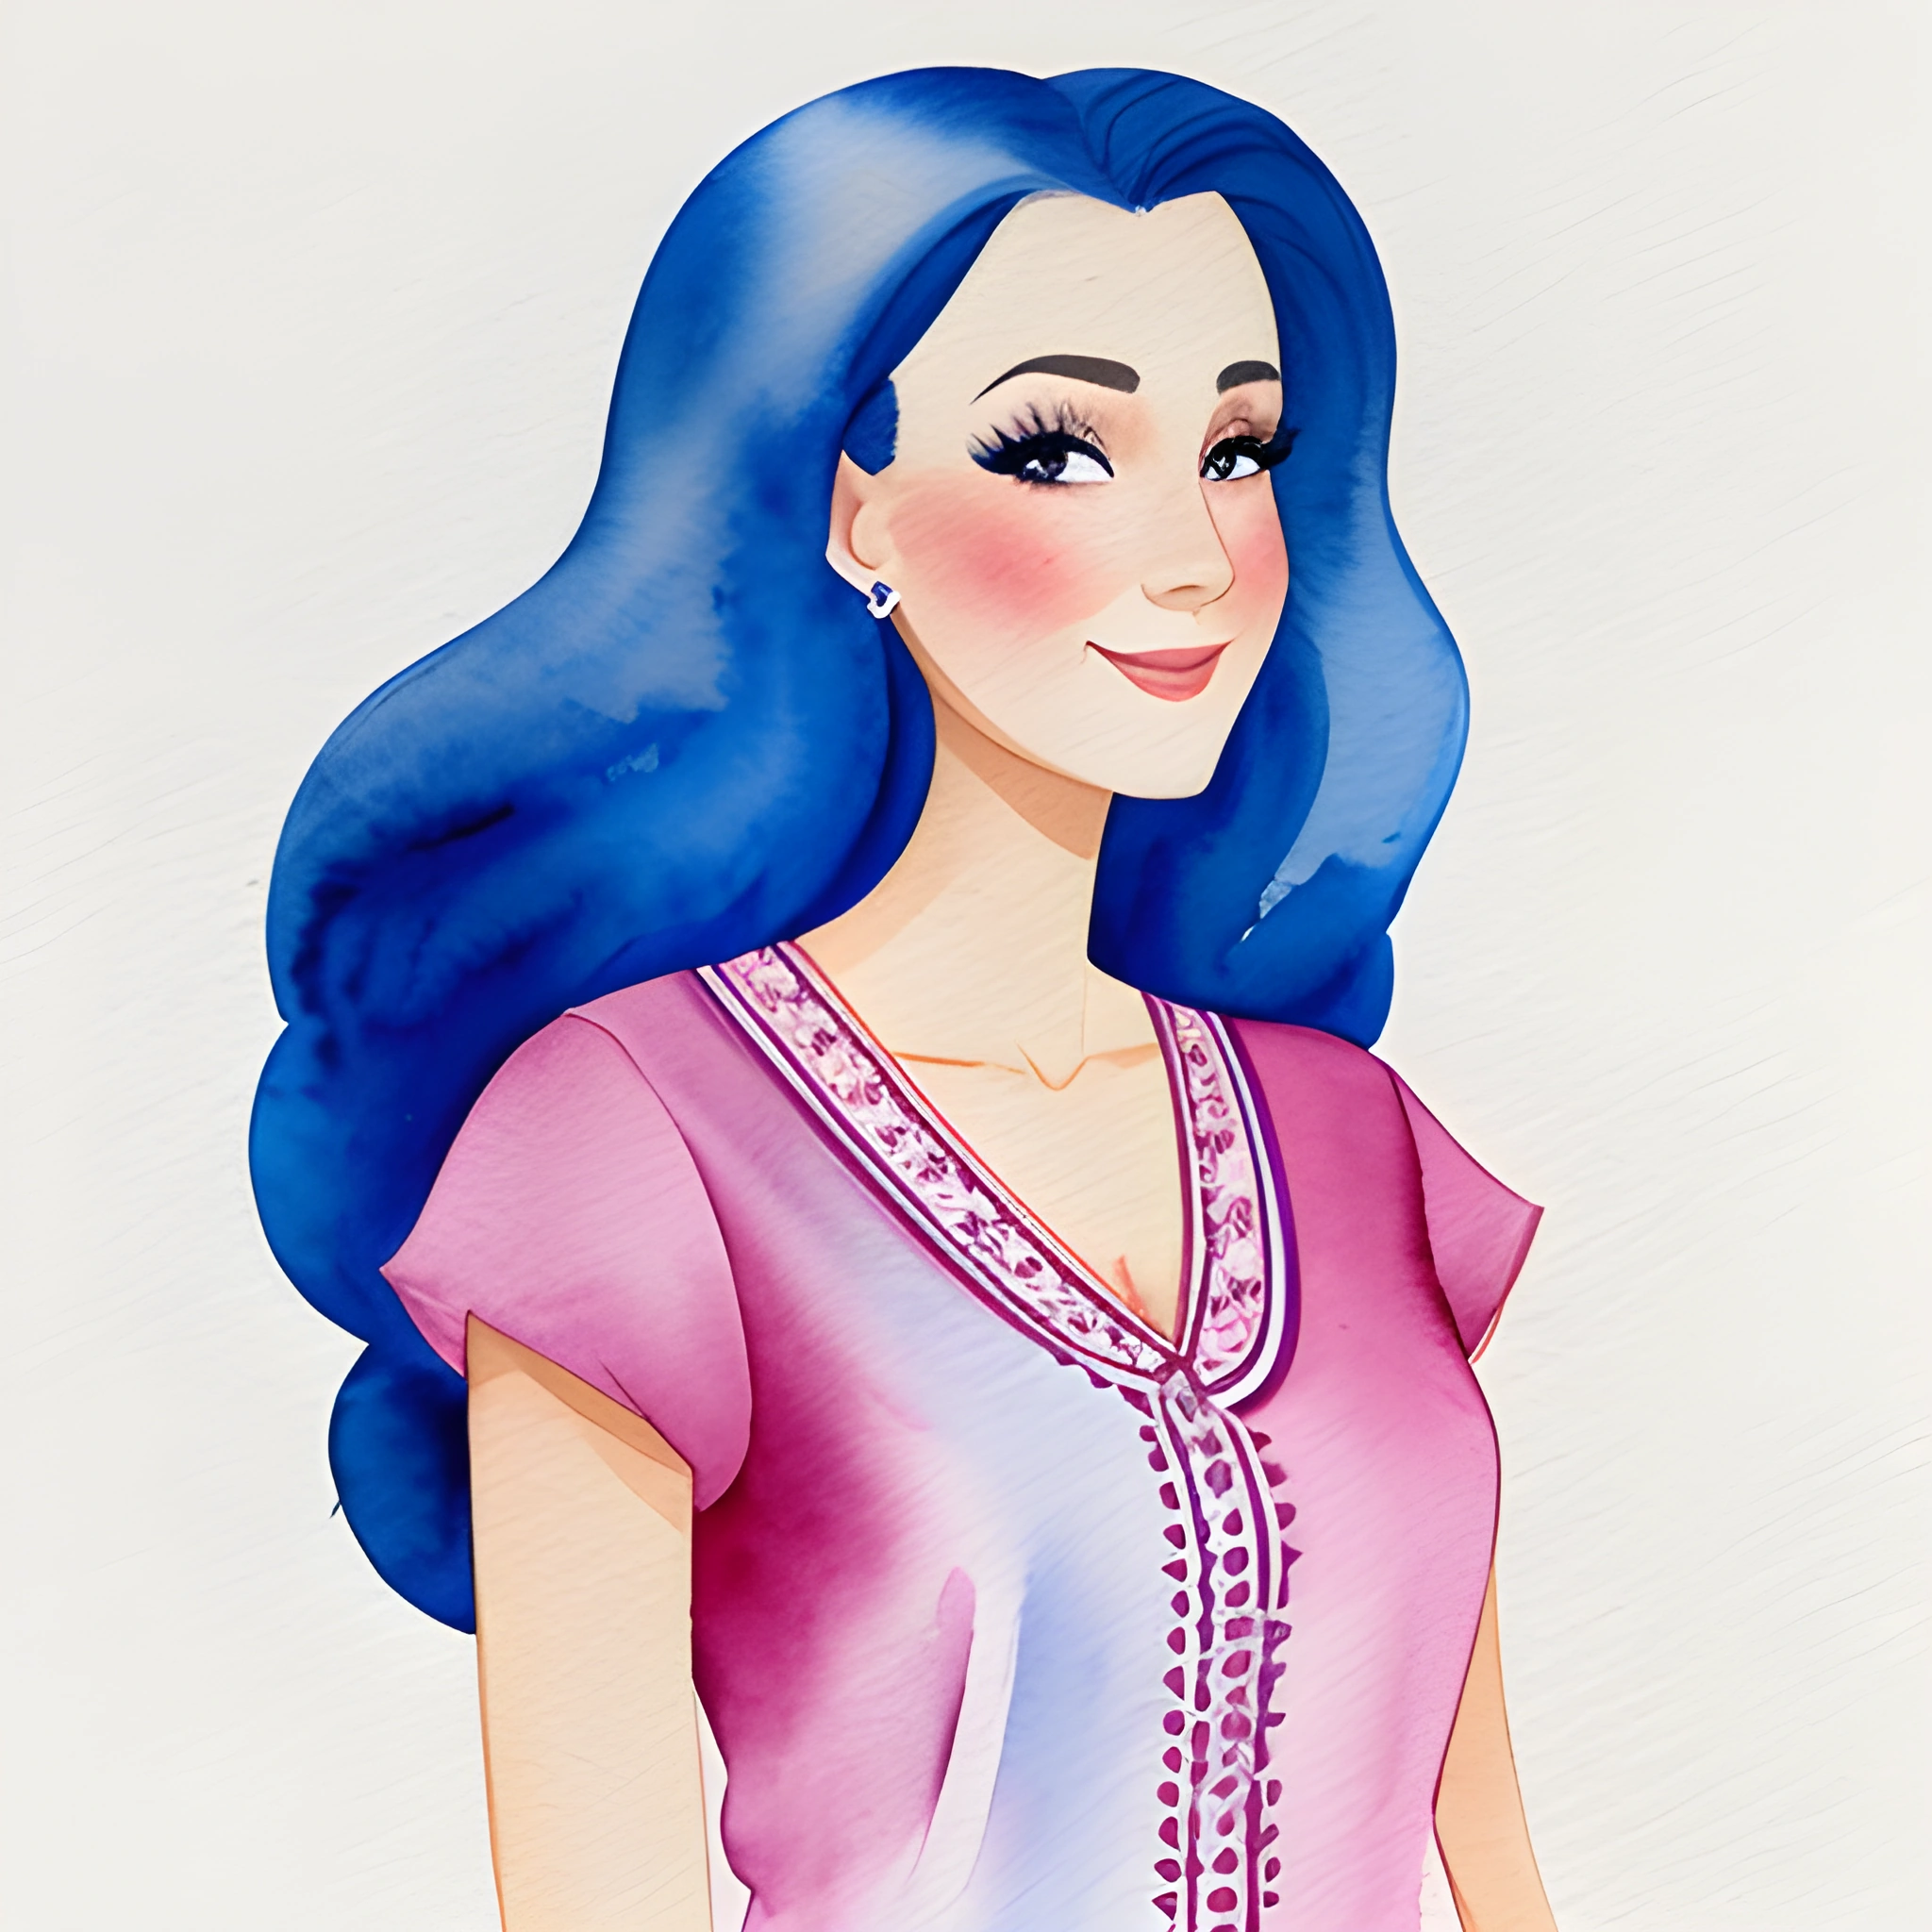 a drawing of a woman with blue hair and a pink top